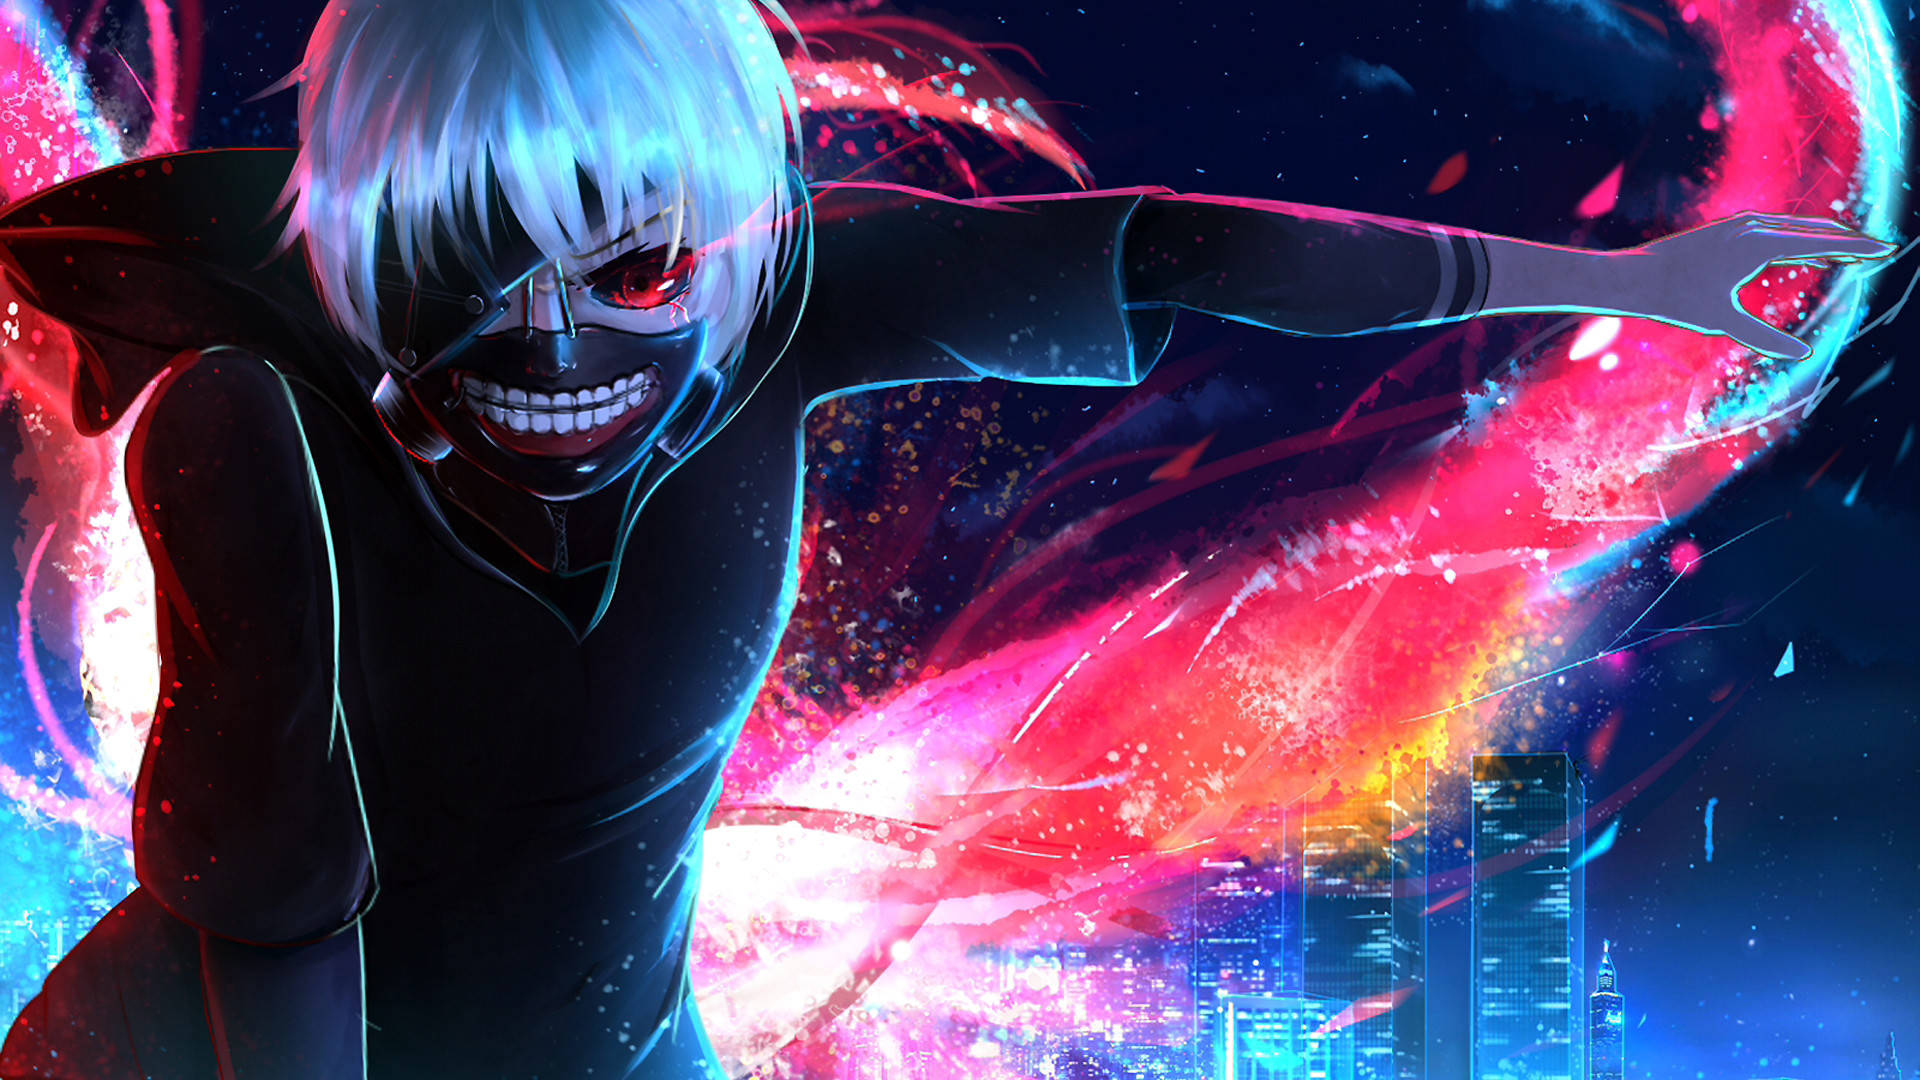 Colorful Tokyo Ghoul Poster Hd Background